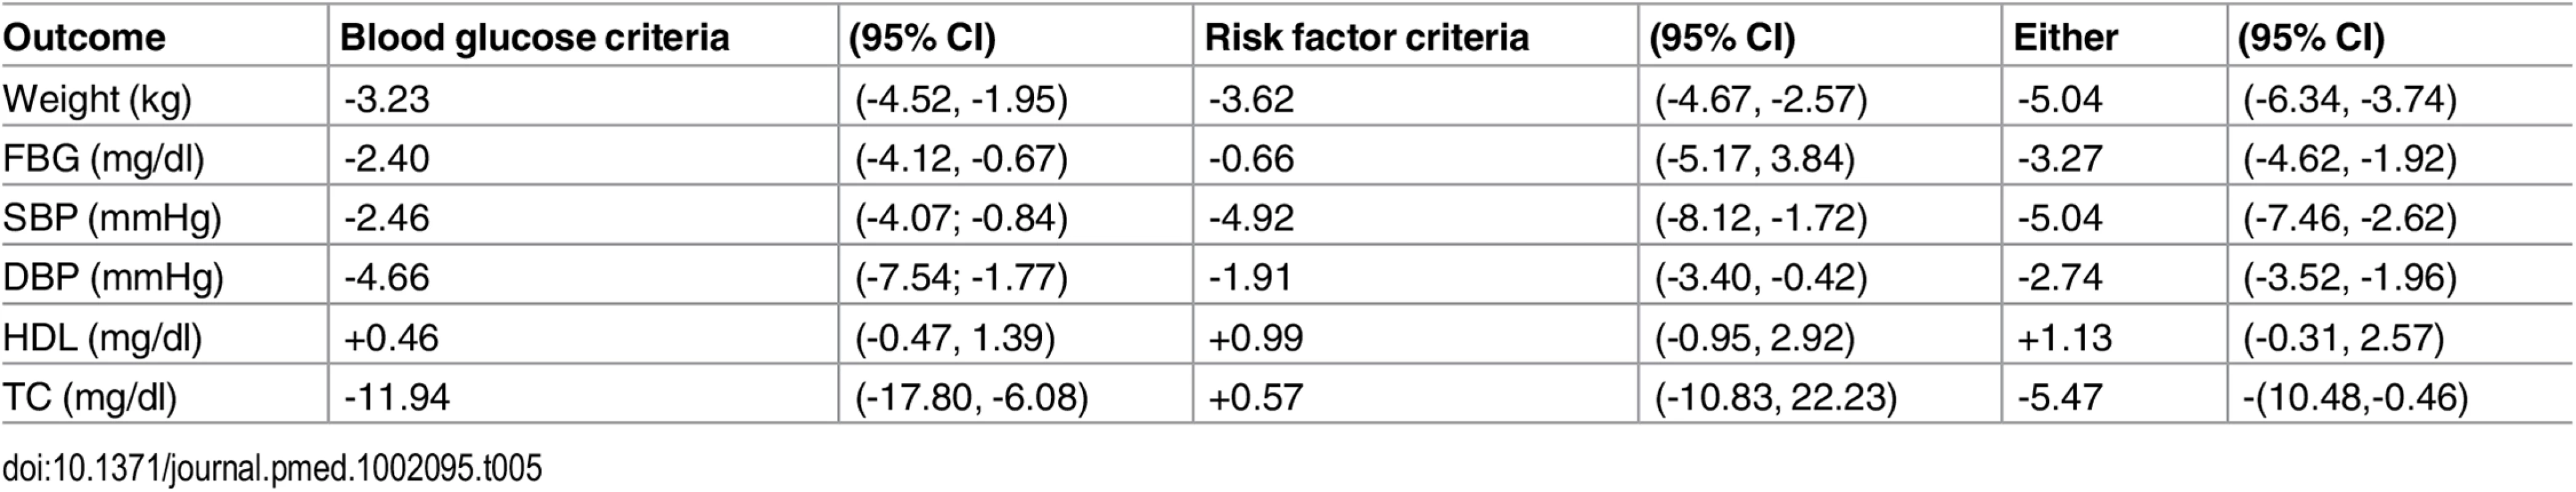 Outcomes stratified by method used to determine “high risk” status.